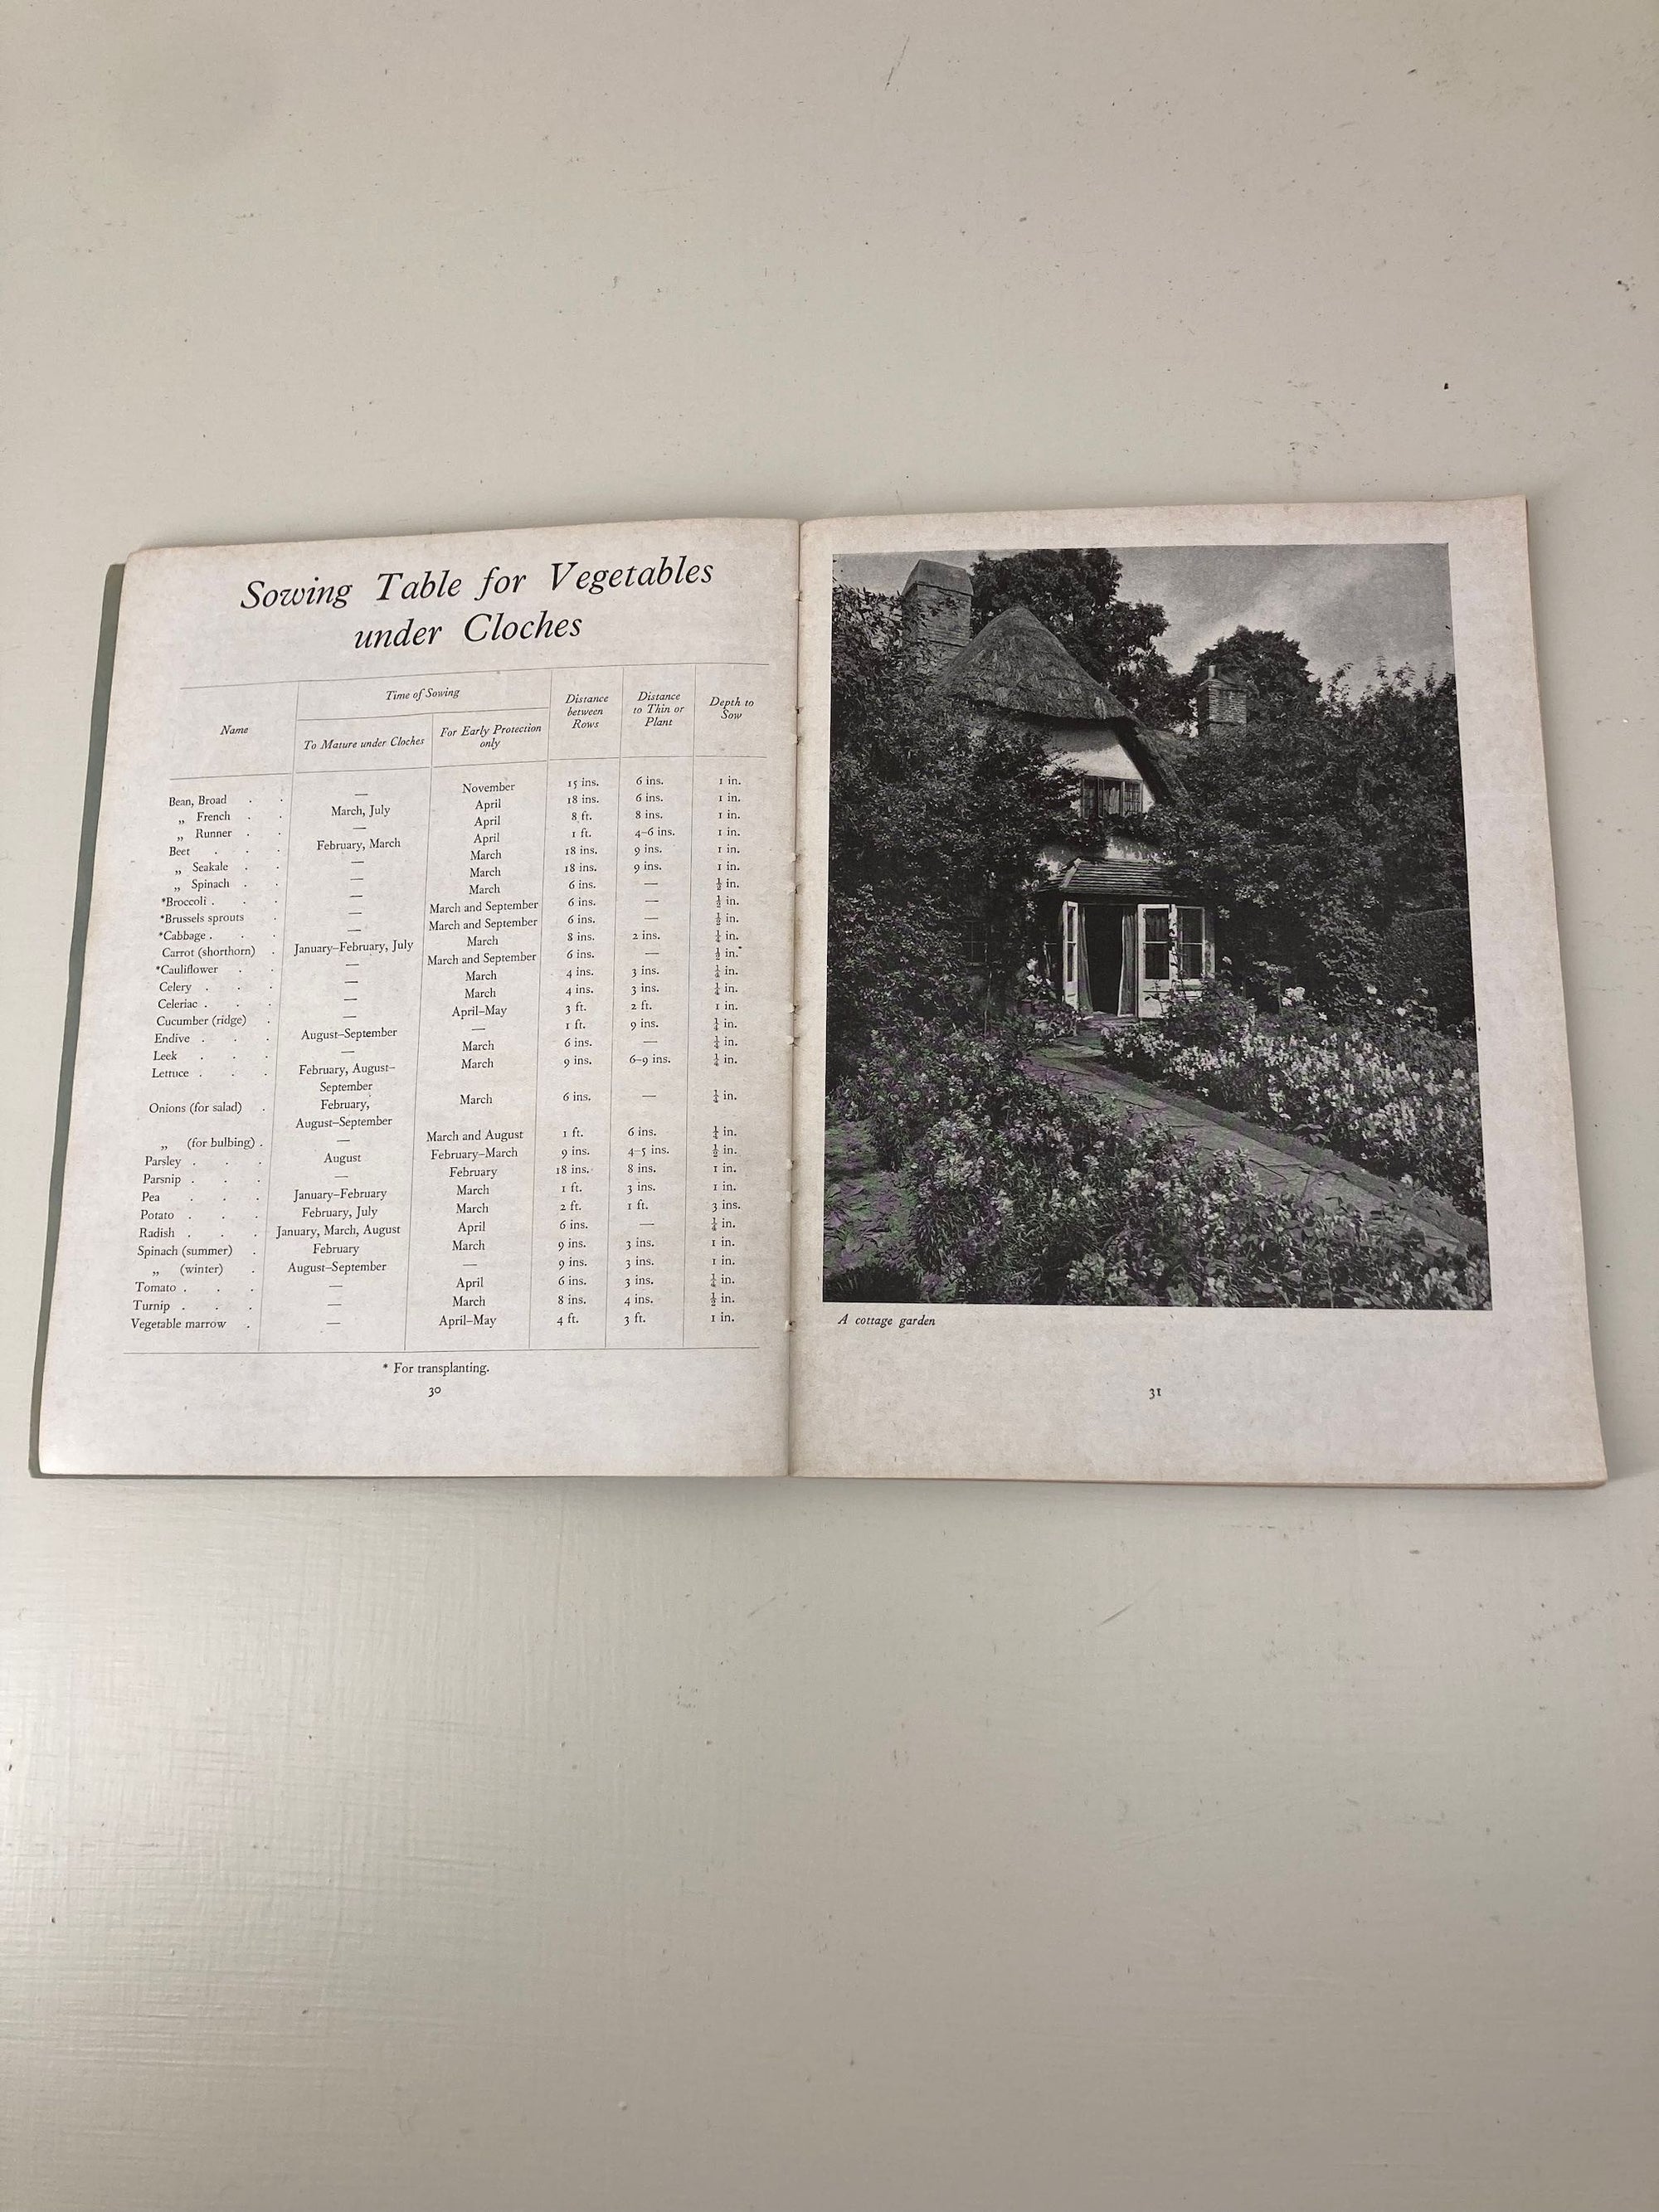 Amateur Gardening Annual for 1944